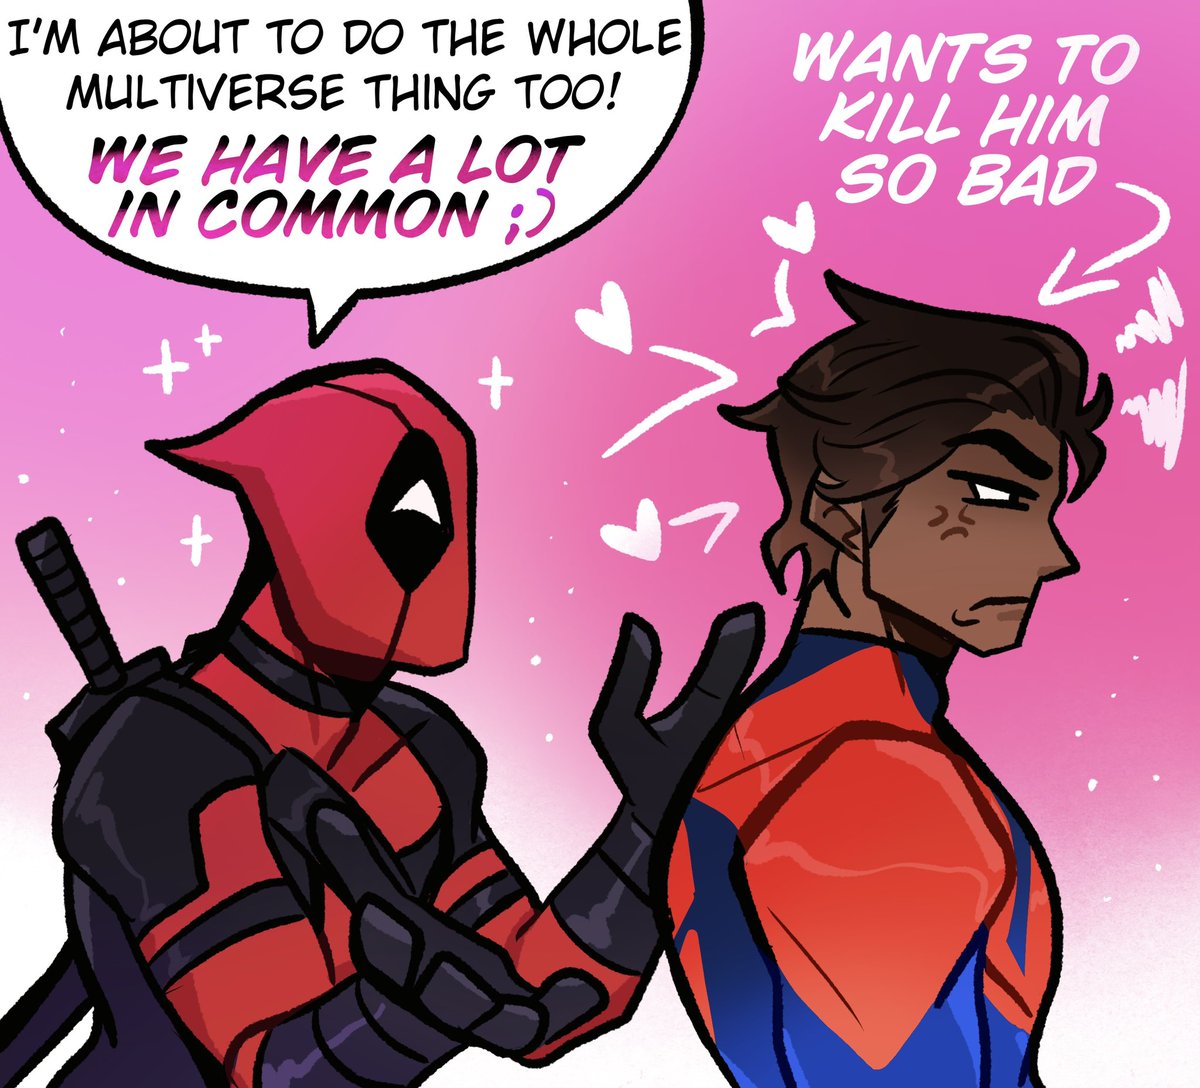 Deadpool telling Miguel about his next movie